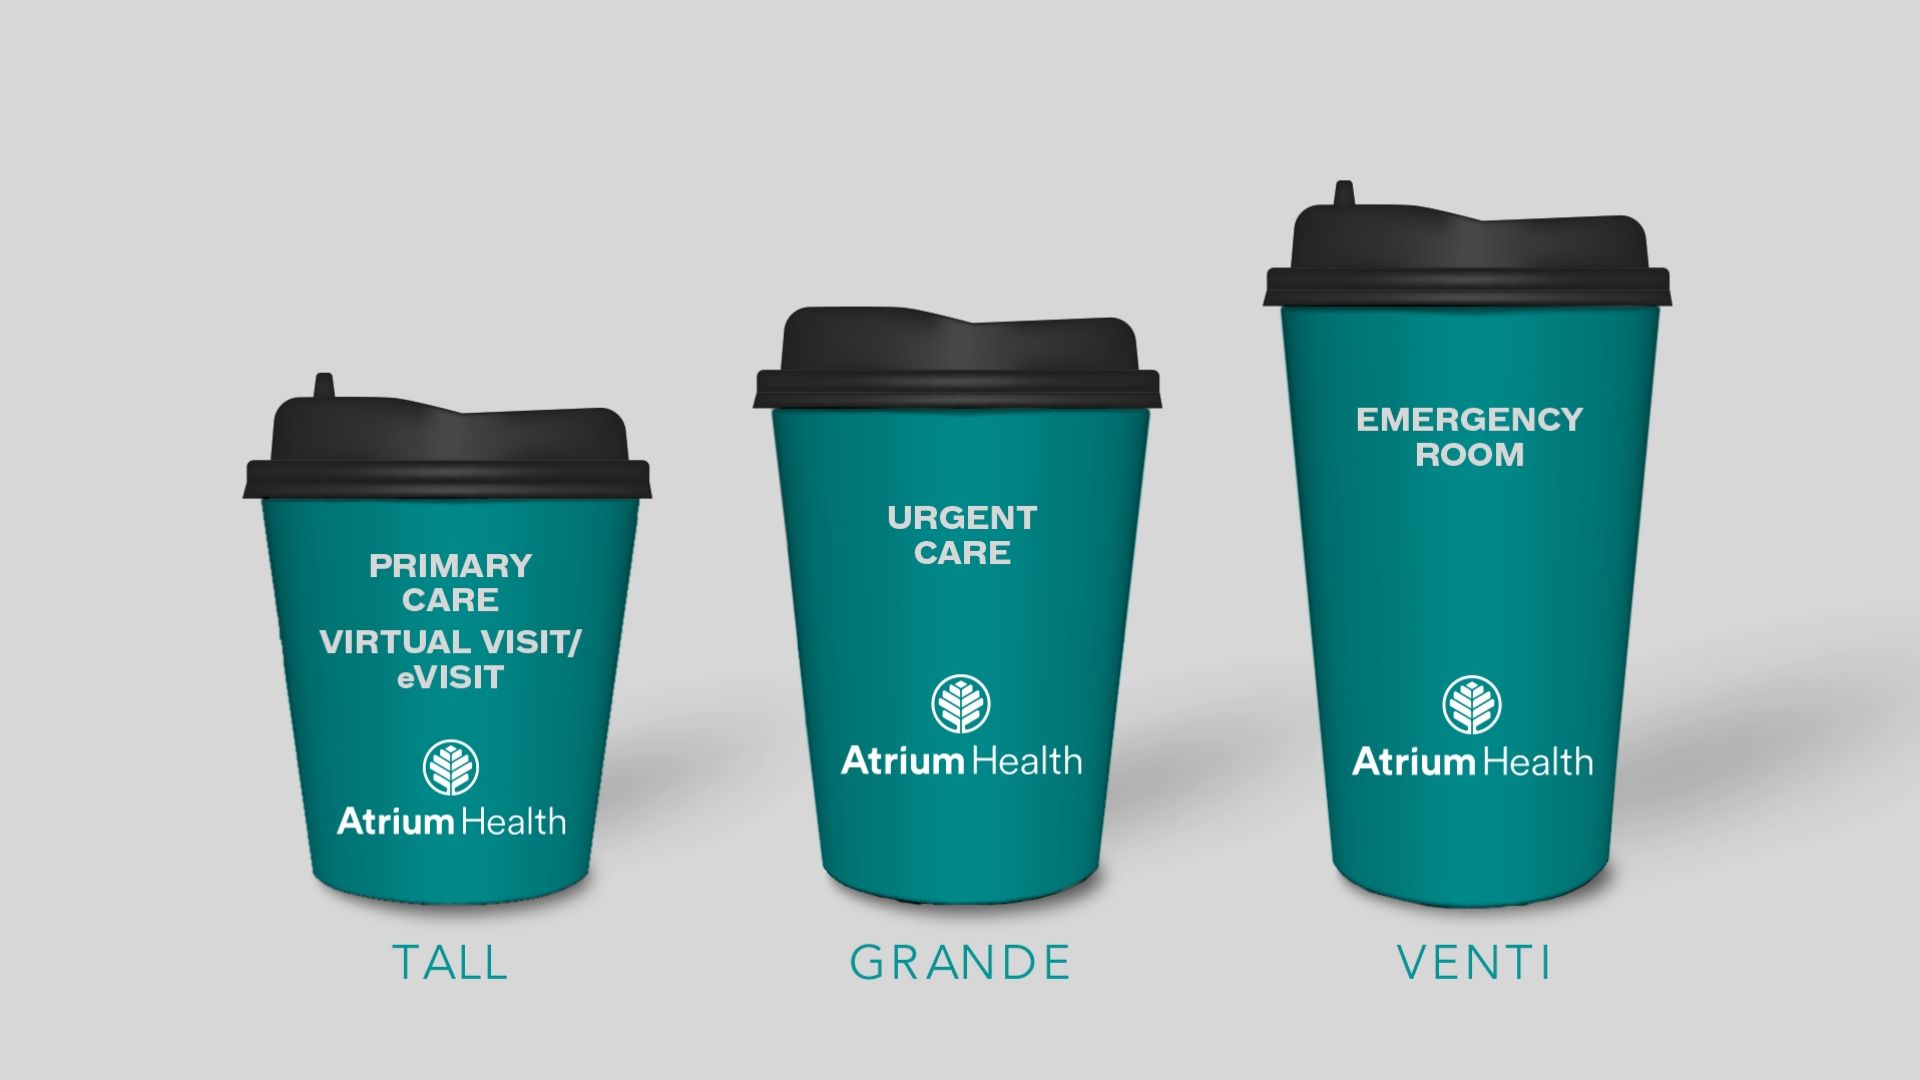 When seeking care, it’s important to know where and when to see a doctor. But how do you know where to go when you need care? Luckily, knowing where to go is as easy as ordering your favorite cup of coffee.  